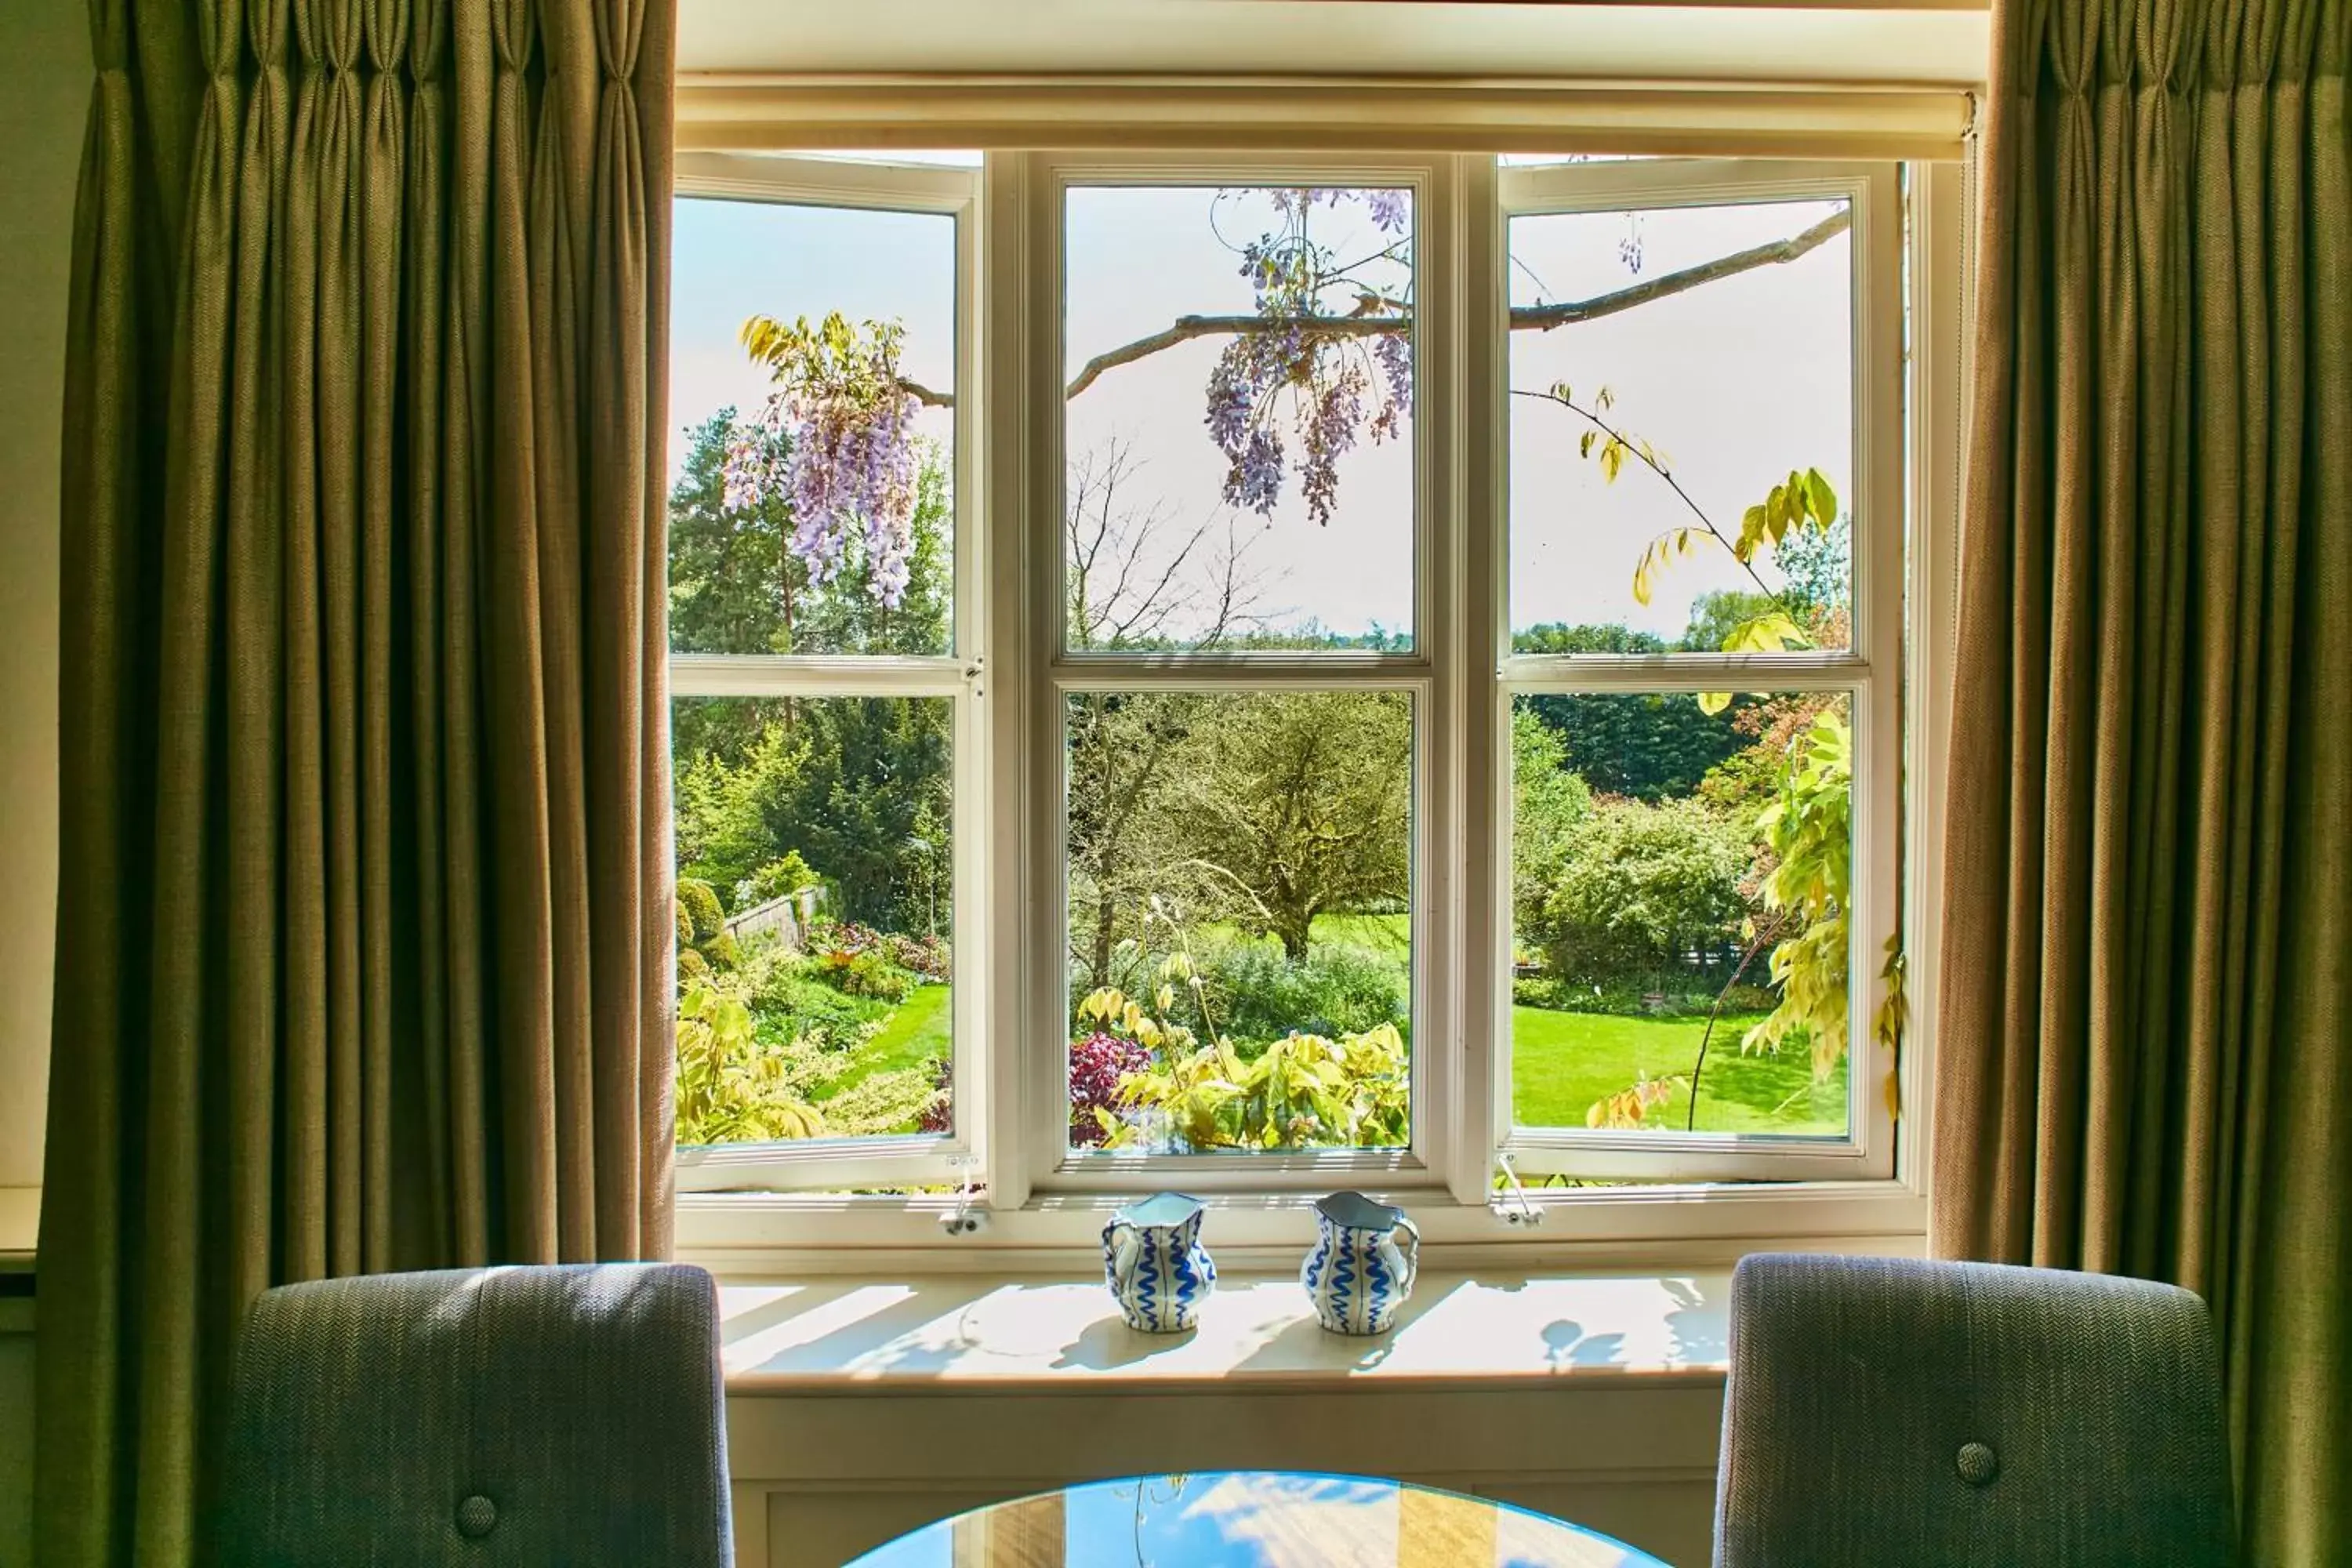 View (from property/room) in The Bath Priory - A Relais & Chateaux Hotel